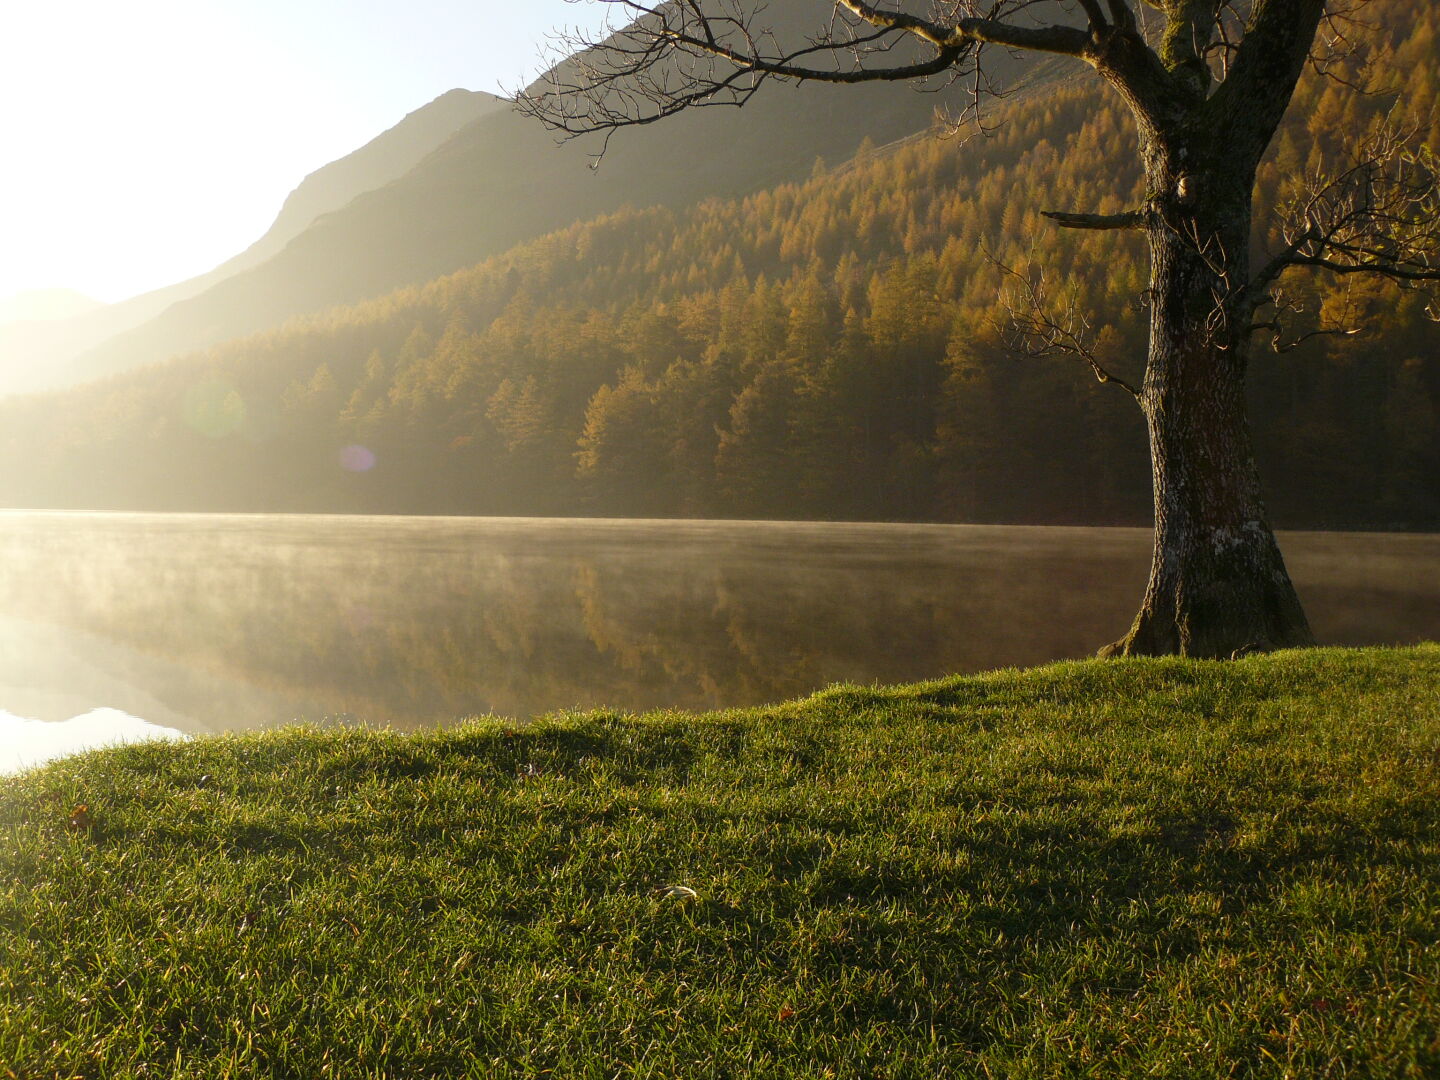 Sunrise at Buttermere Lake. We were there for a long weekend, and this is the beginning of day 1.